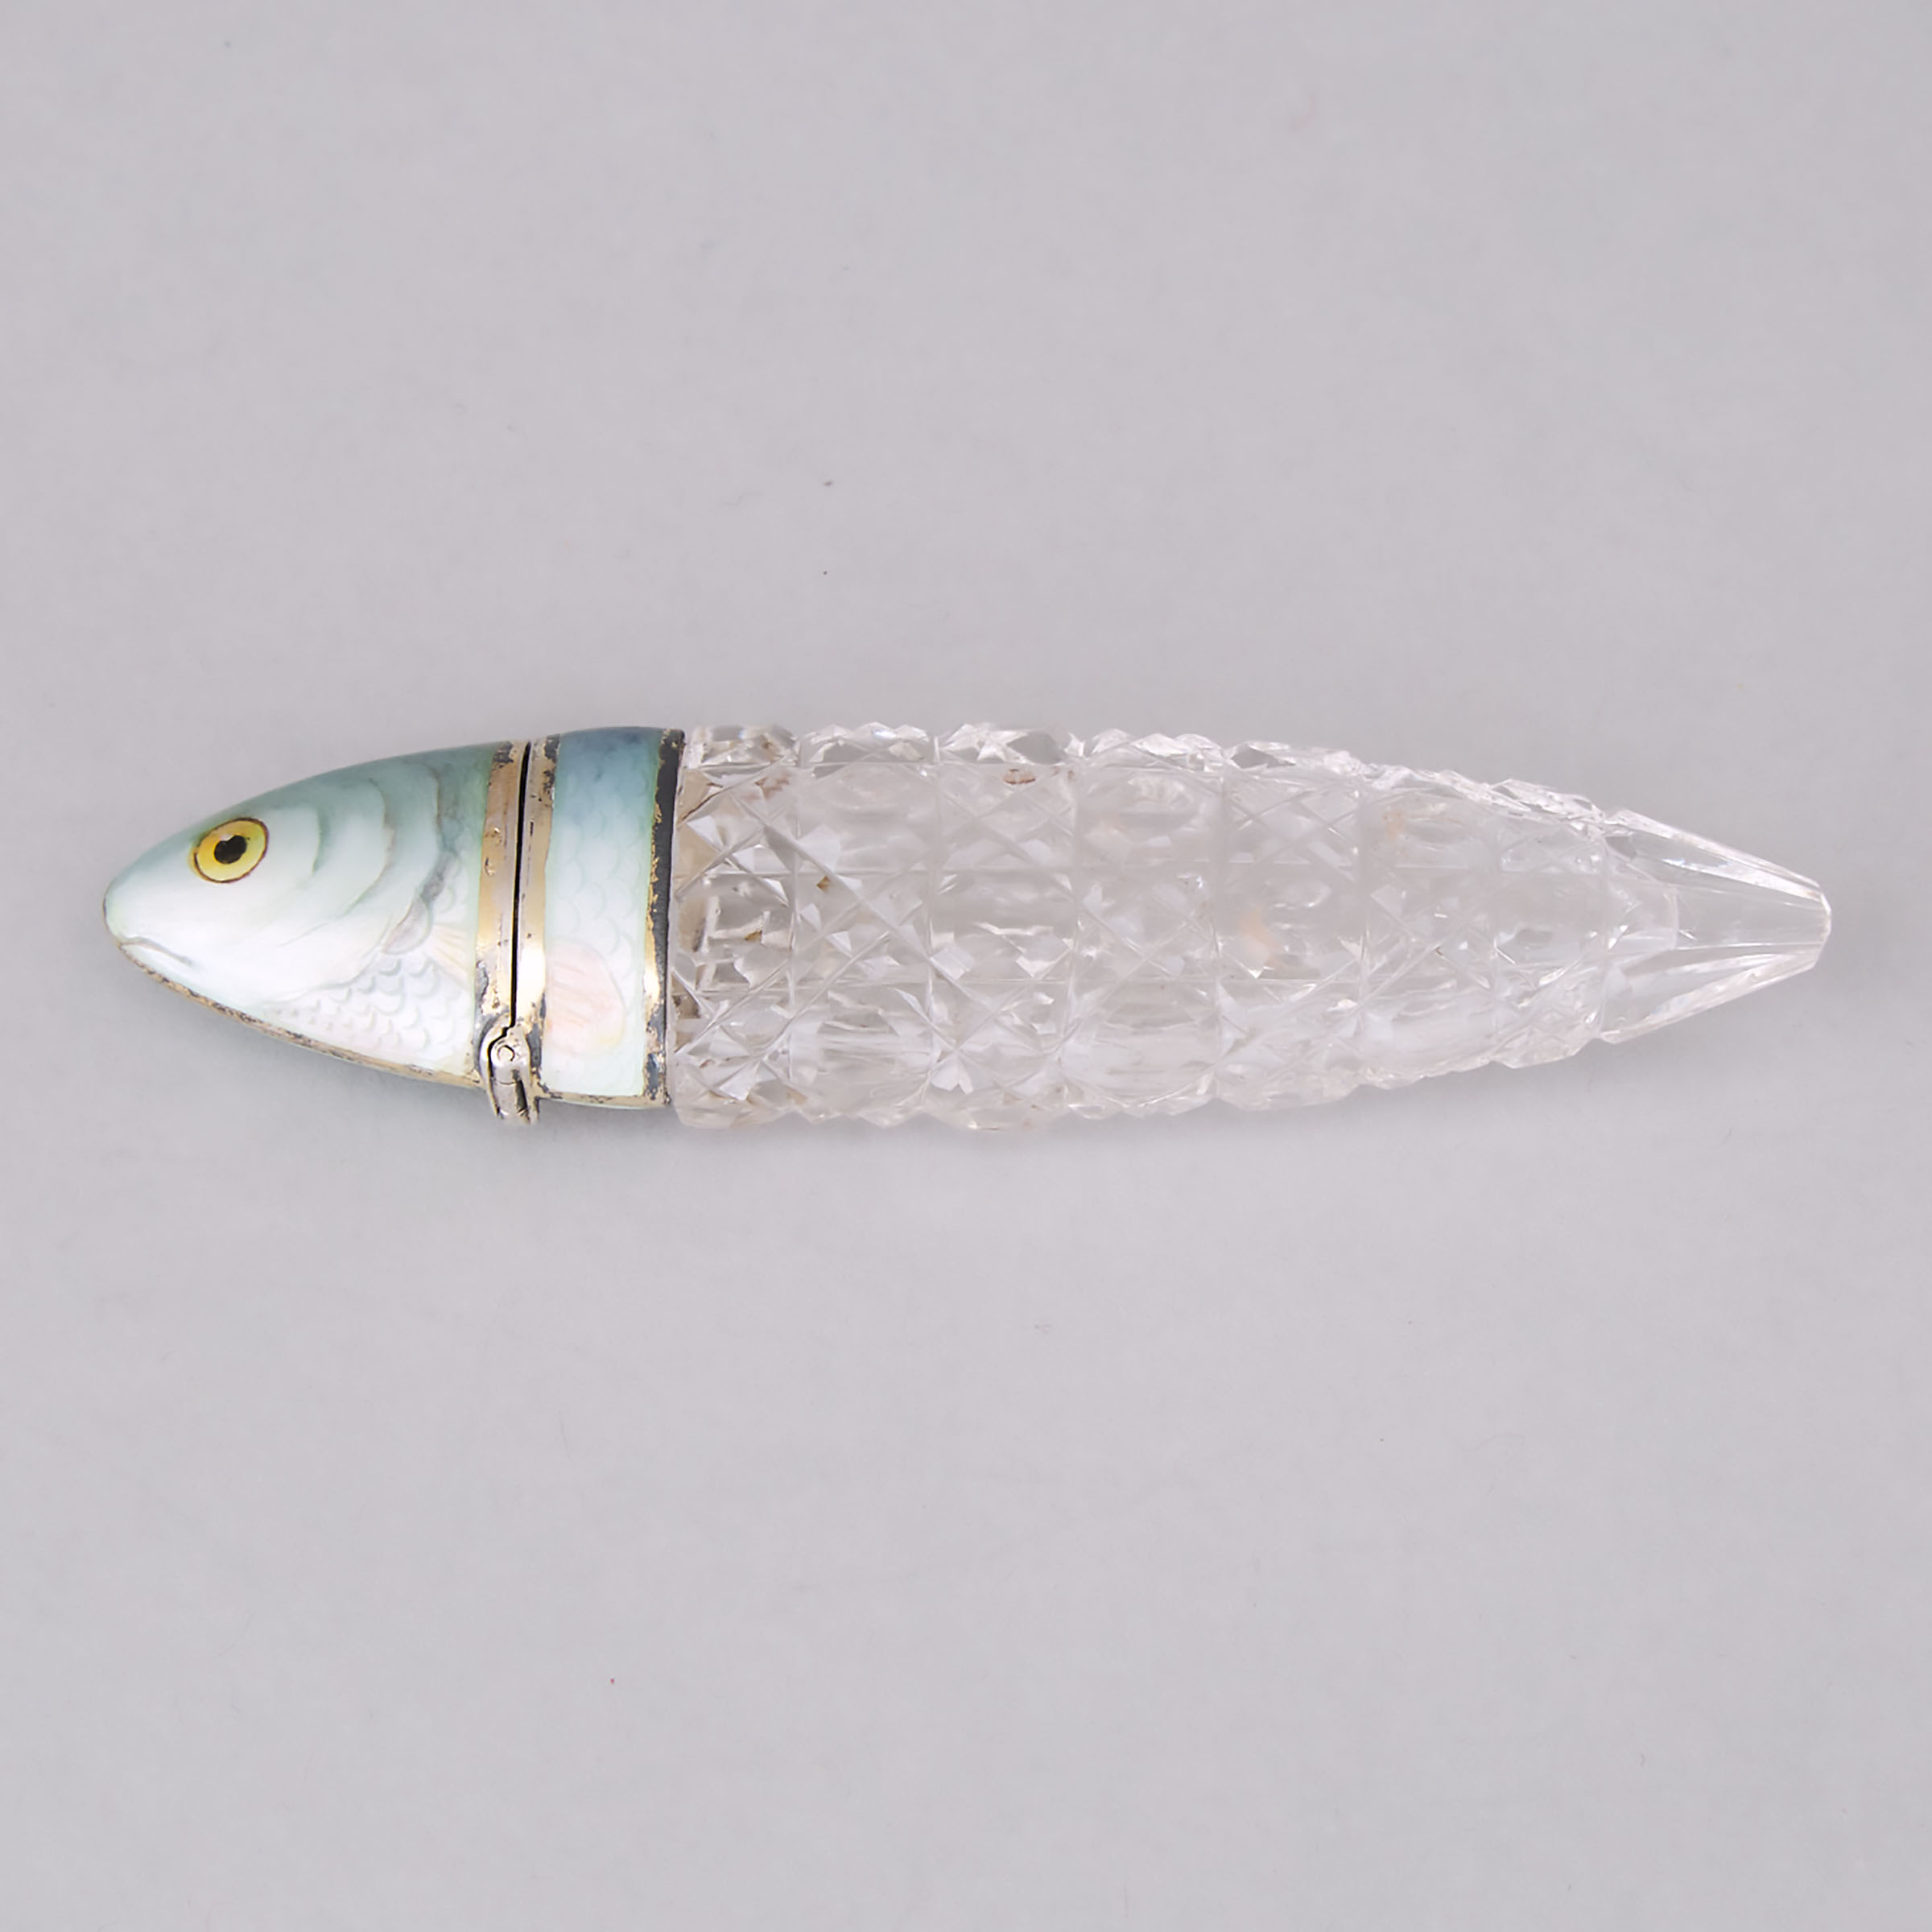 Continental Enameled Silver Mounted Cut Glass Novelty Fish-Form Perfume Bottle, c.1914